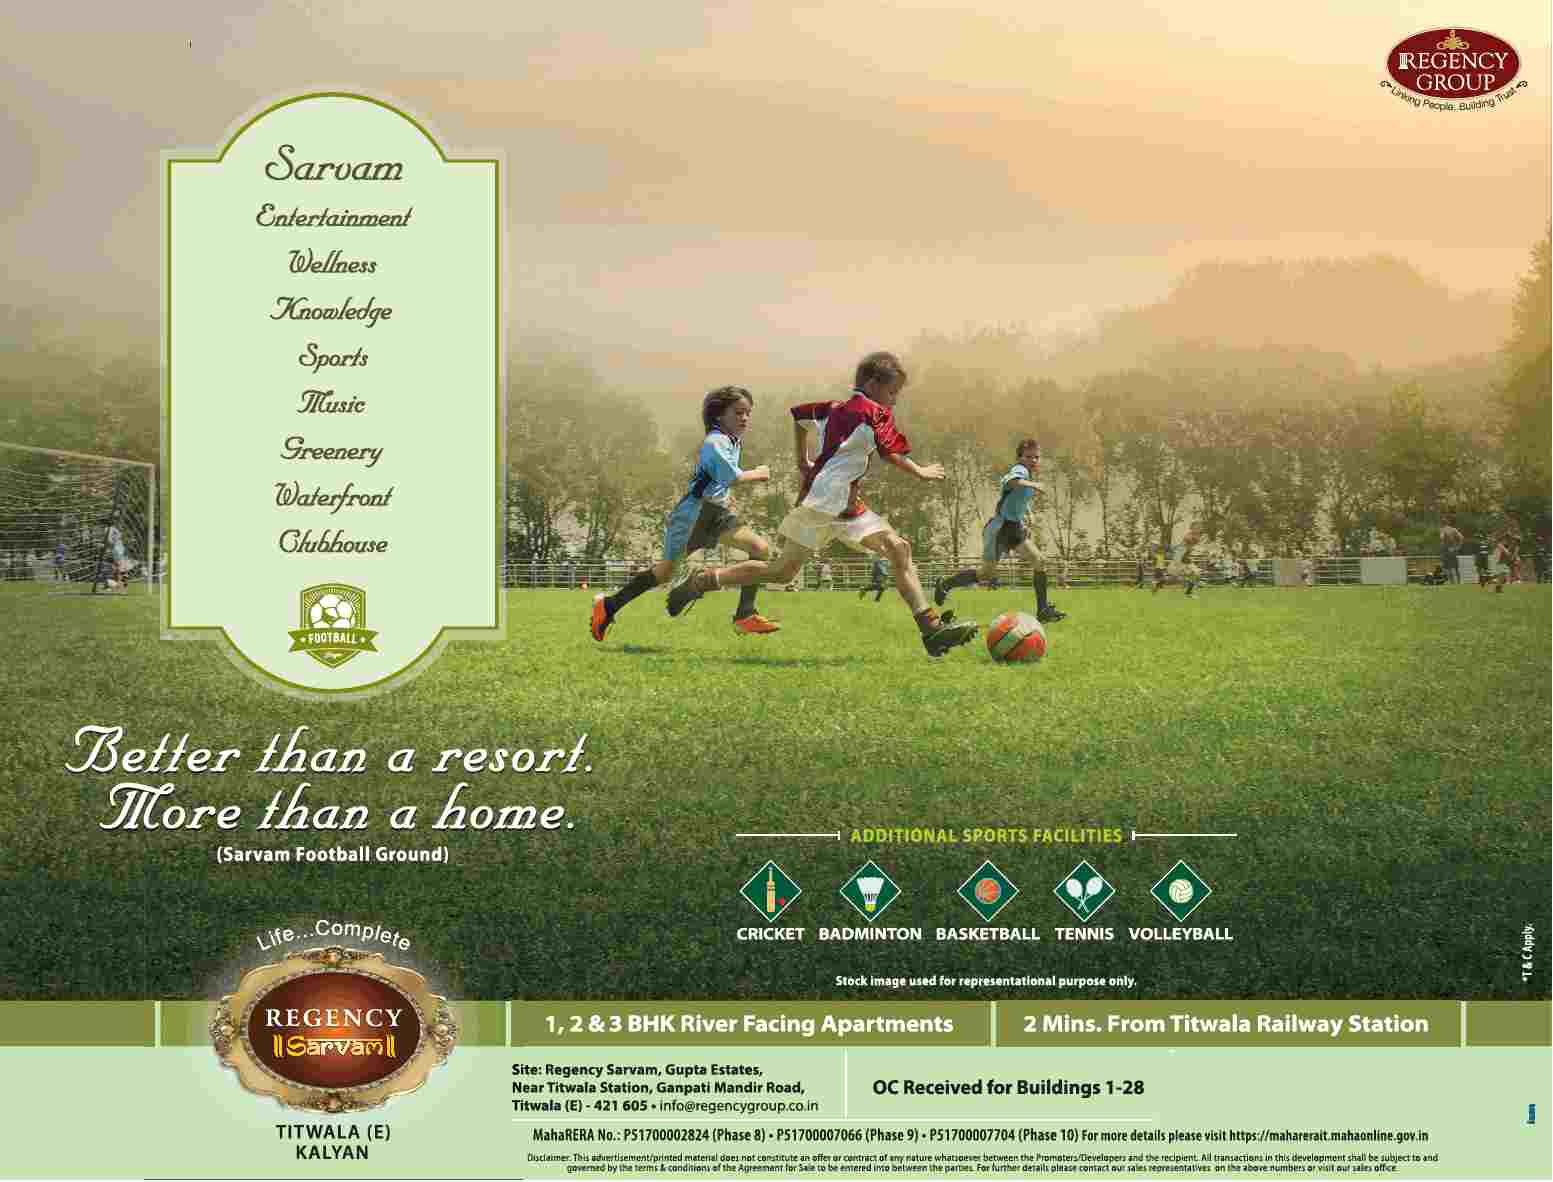 Live at Regency Sarvam which is better than a resort & more than a home in Mumbai